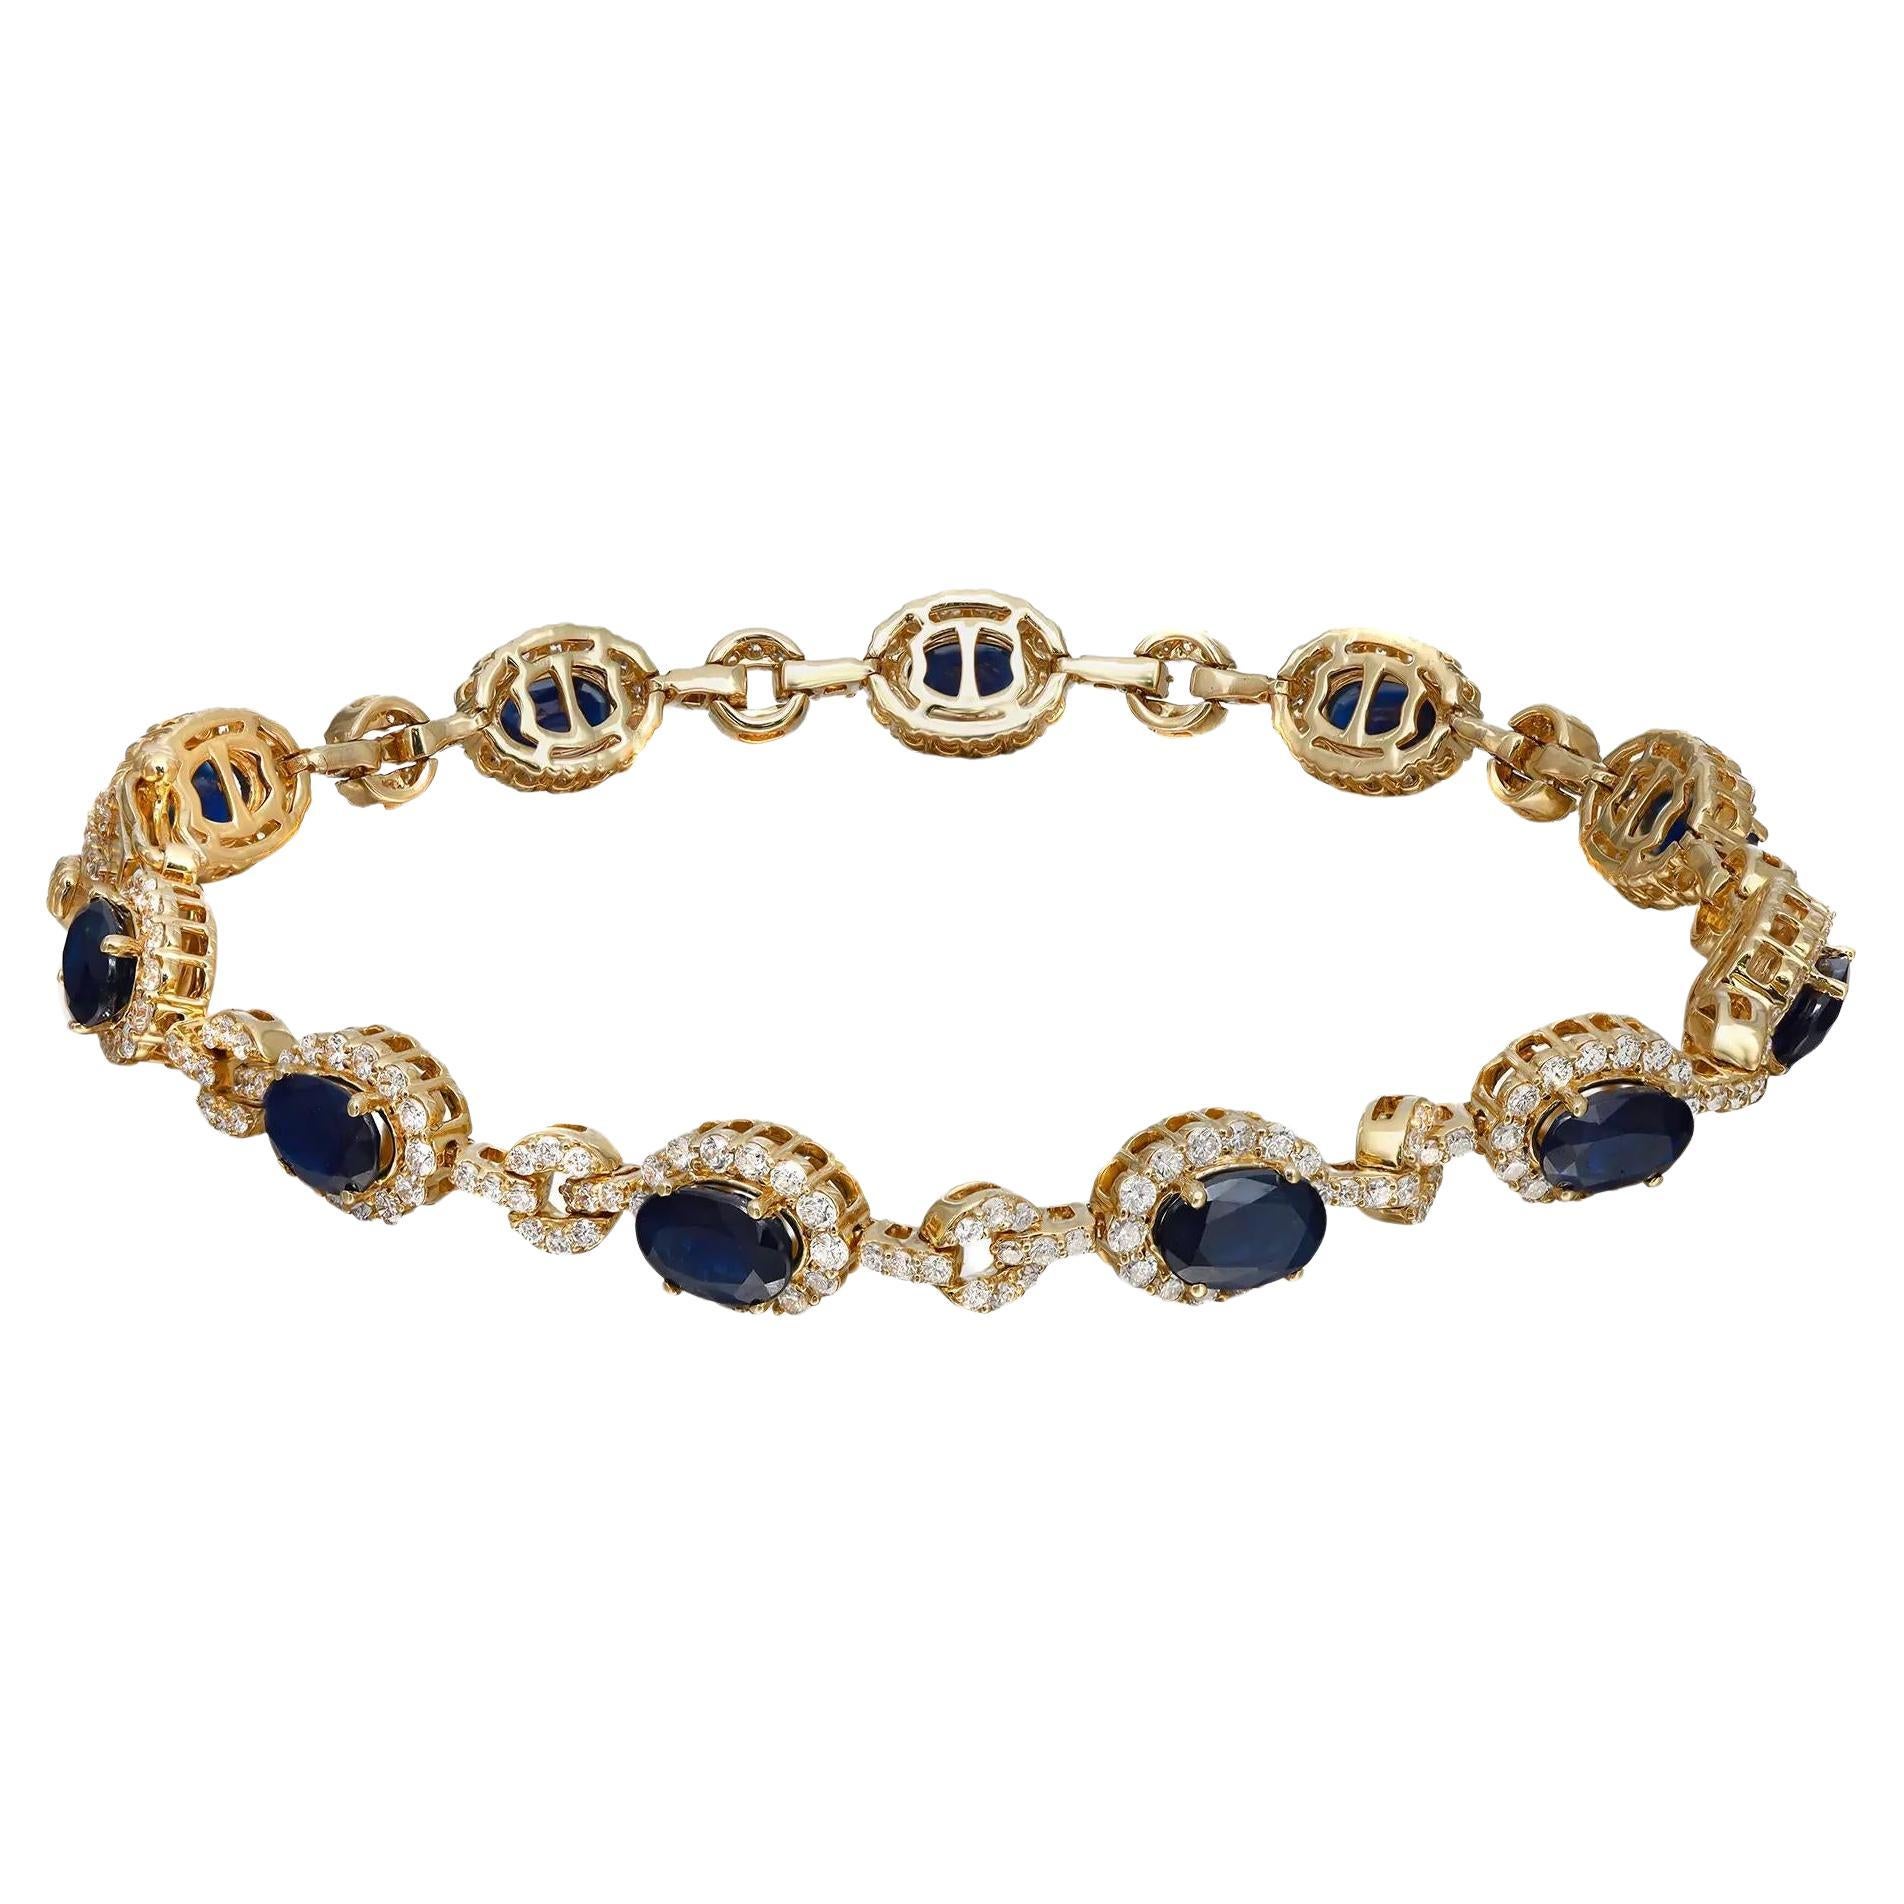 This stunning and exemplary bracelet is crafted in 14K yellow gold. Starring 11 radiant prong set oval cut Blue Sapphires, set with a halo of bright white round cut diamonds and pave diamond accents on the links. Total diamond weight: 2.09 carats.